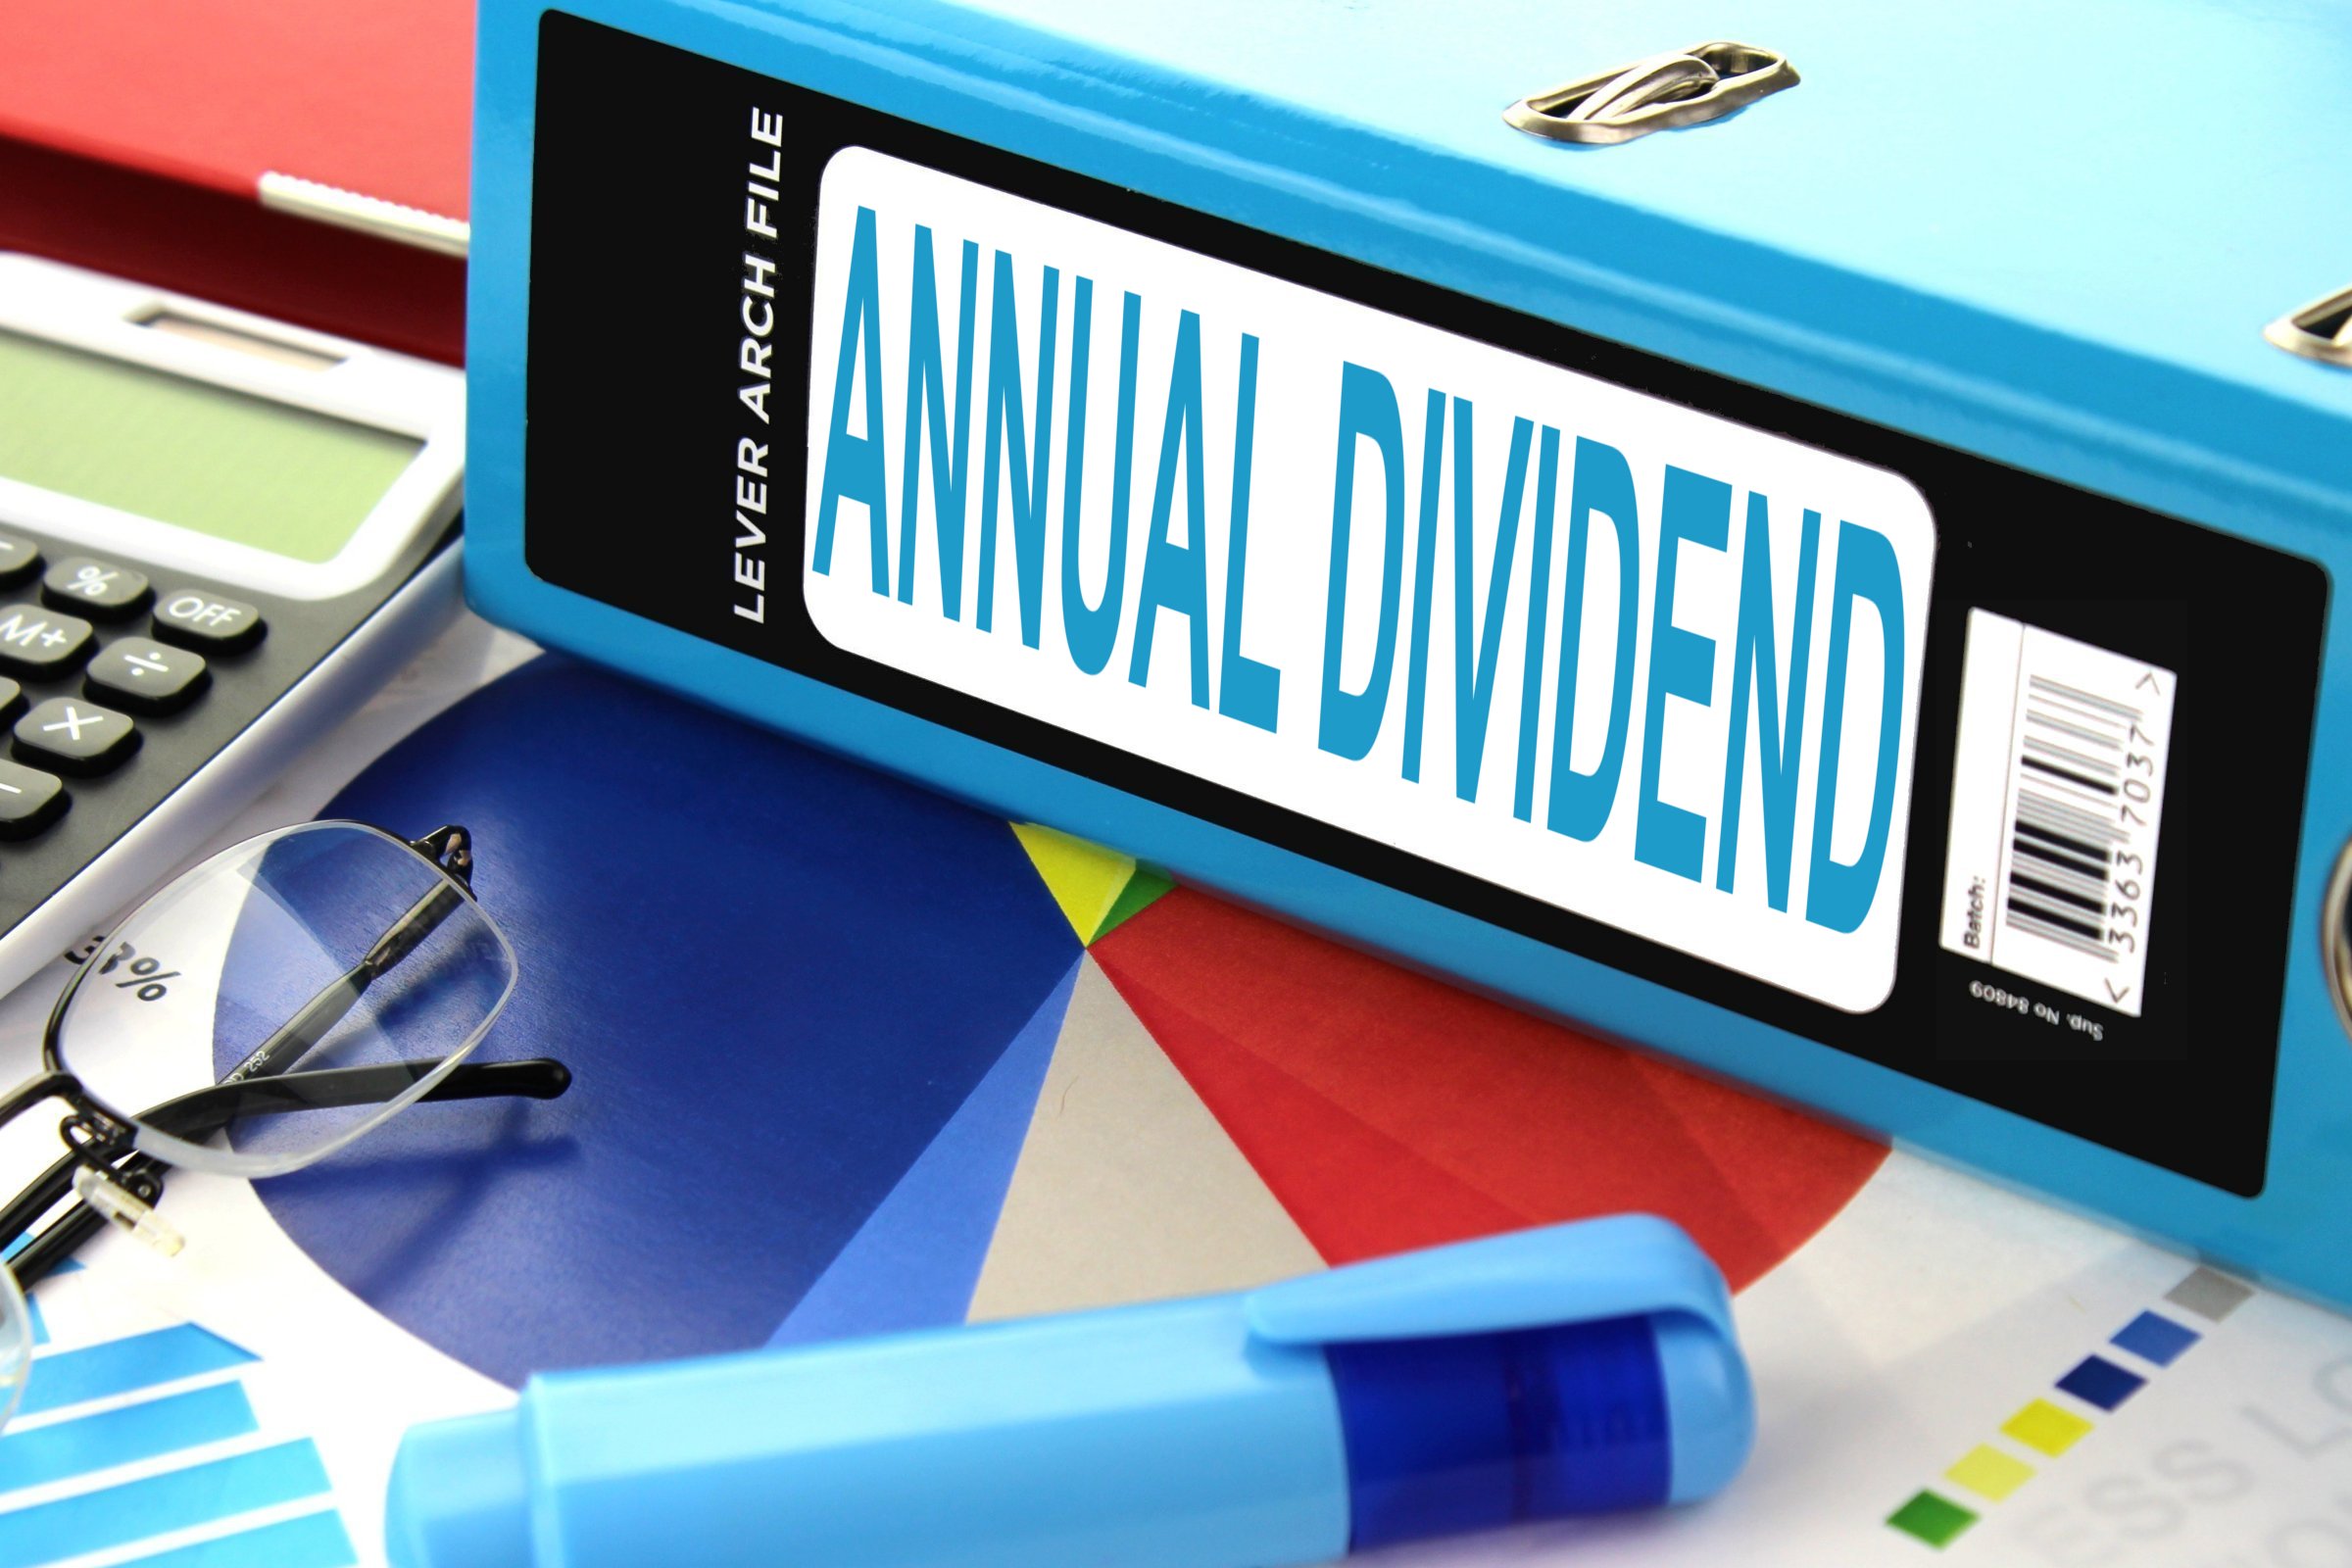 Annual Dividend Free of Charge Creative Commons Lever arch file image